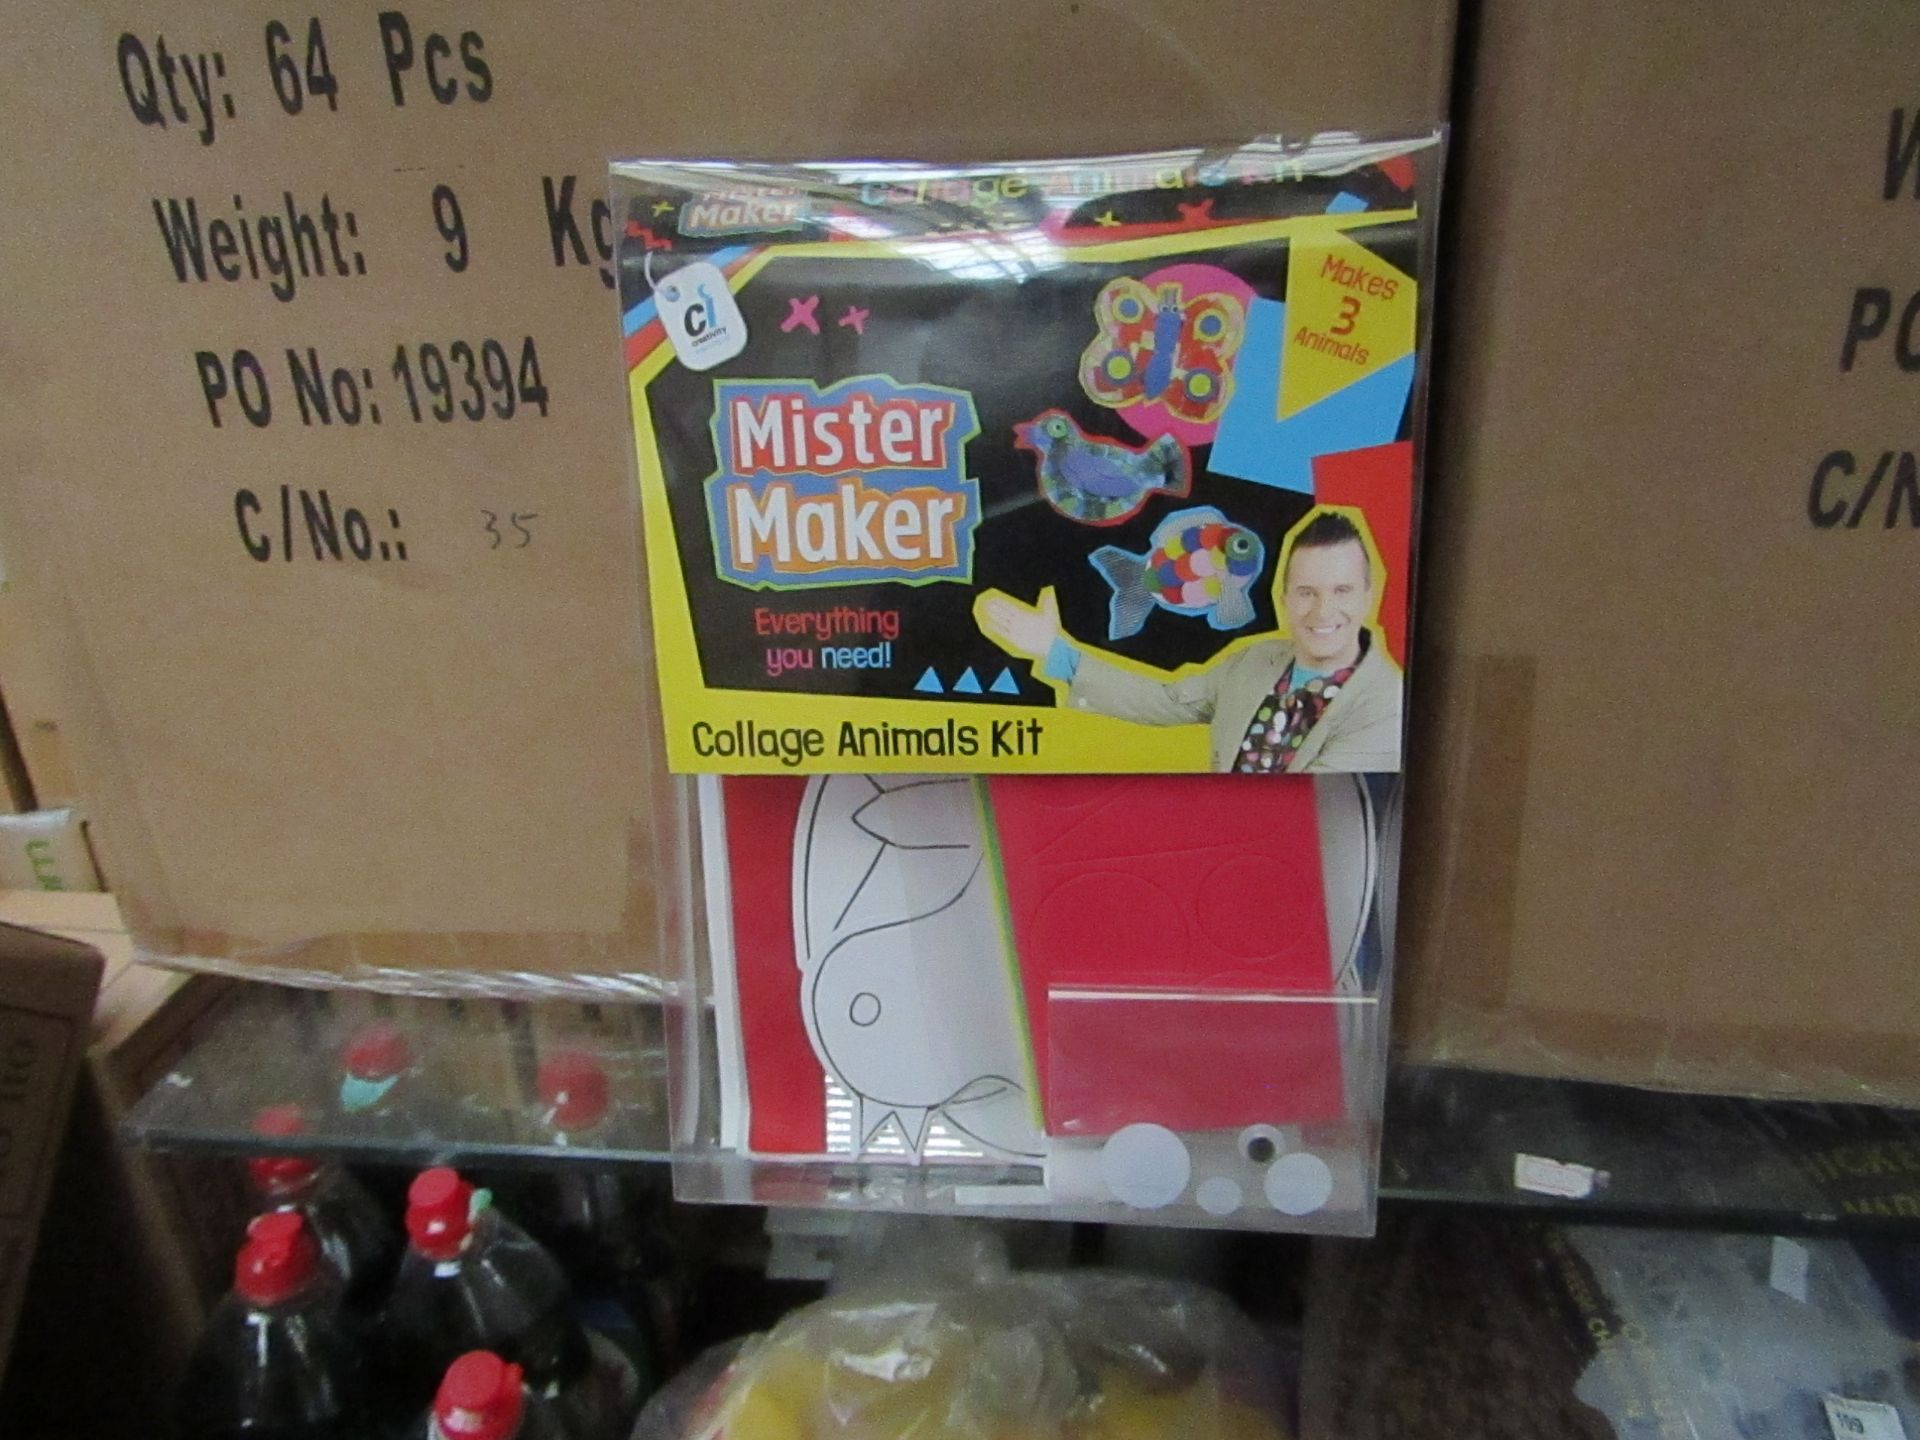 8x Mister Maker collage animals set, new and boxed.